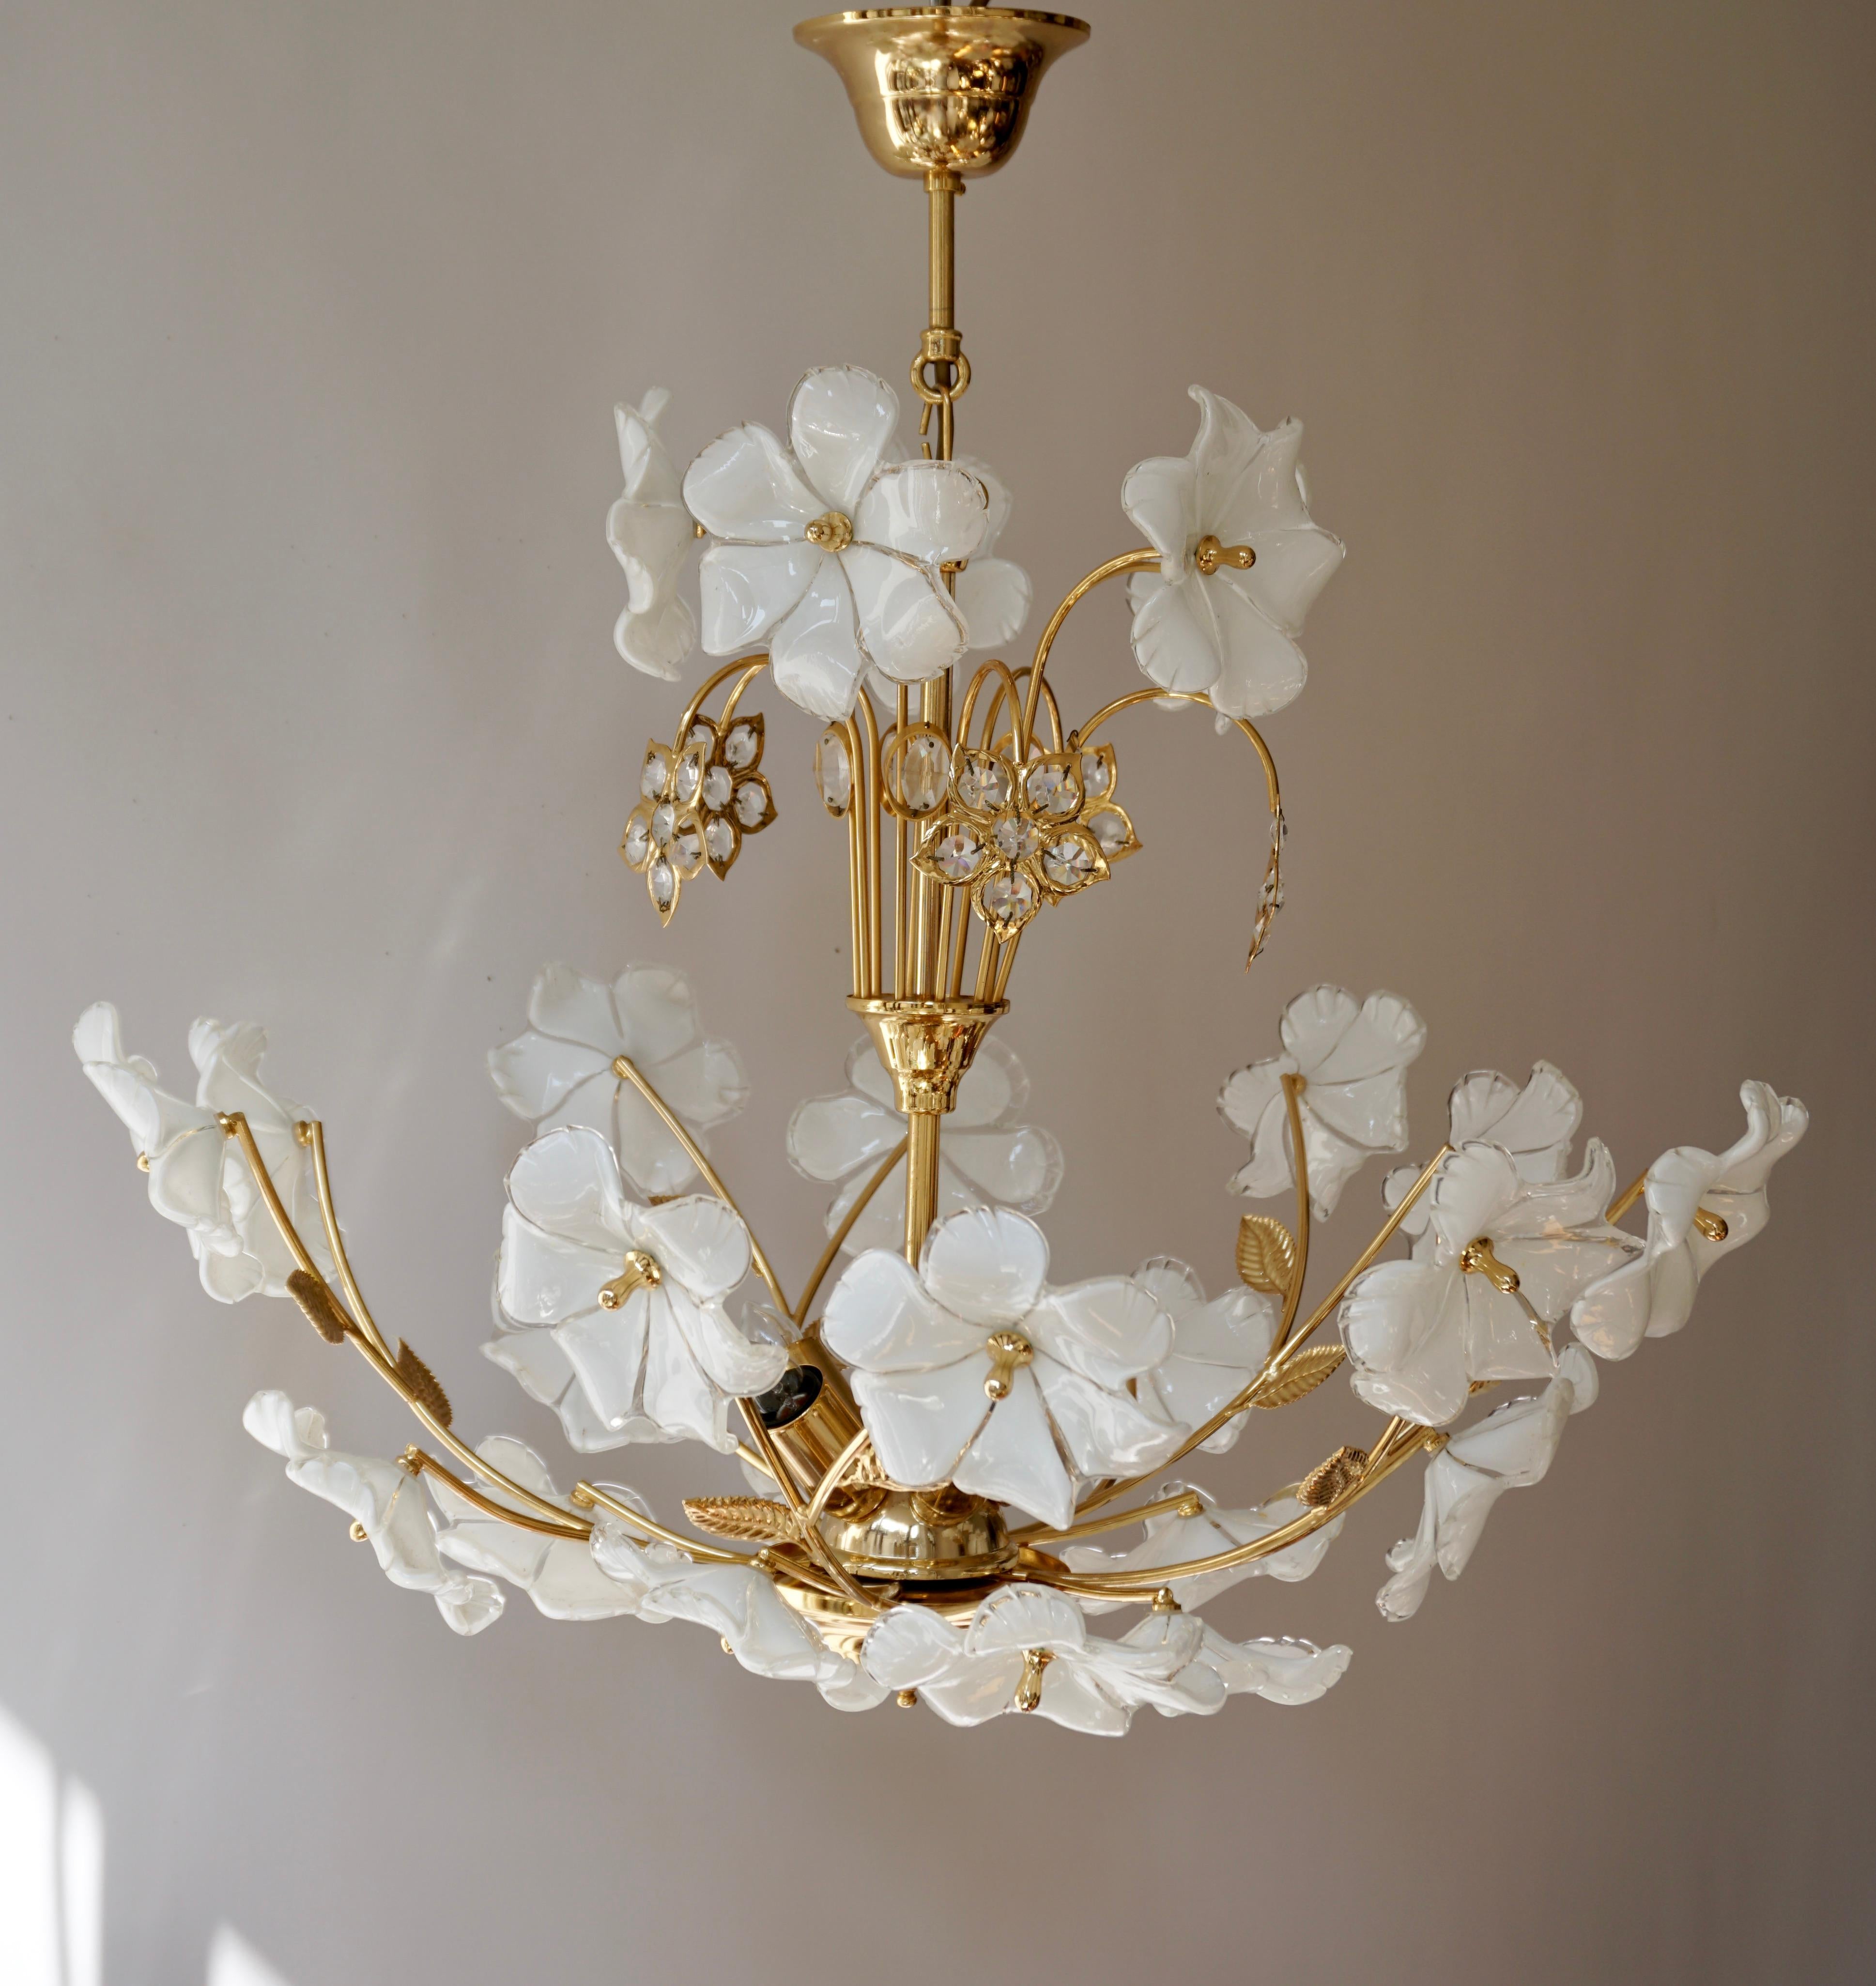 20th Century Italian Brass Chandelier with White Murano Glass and Crystal Flowers